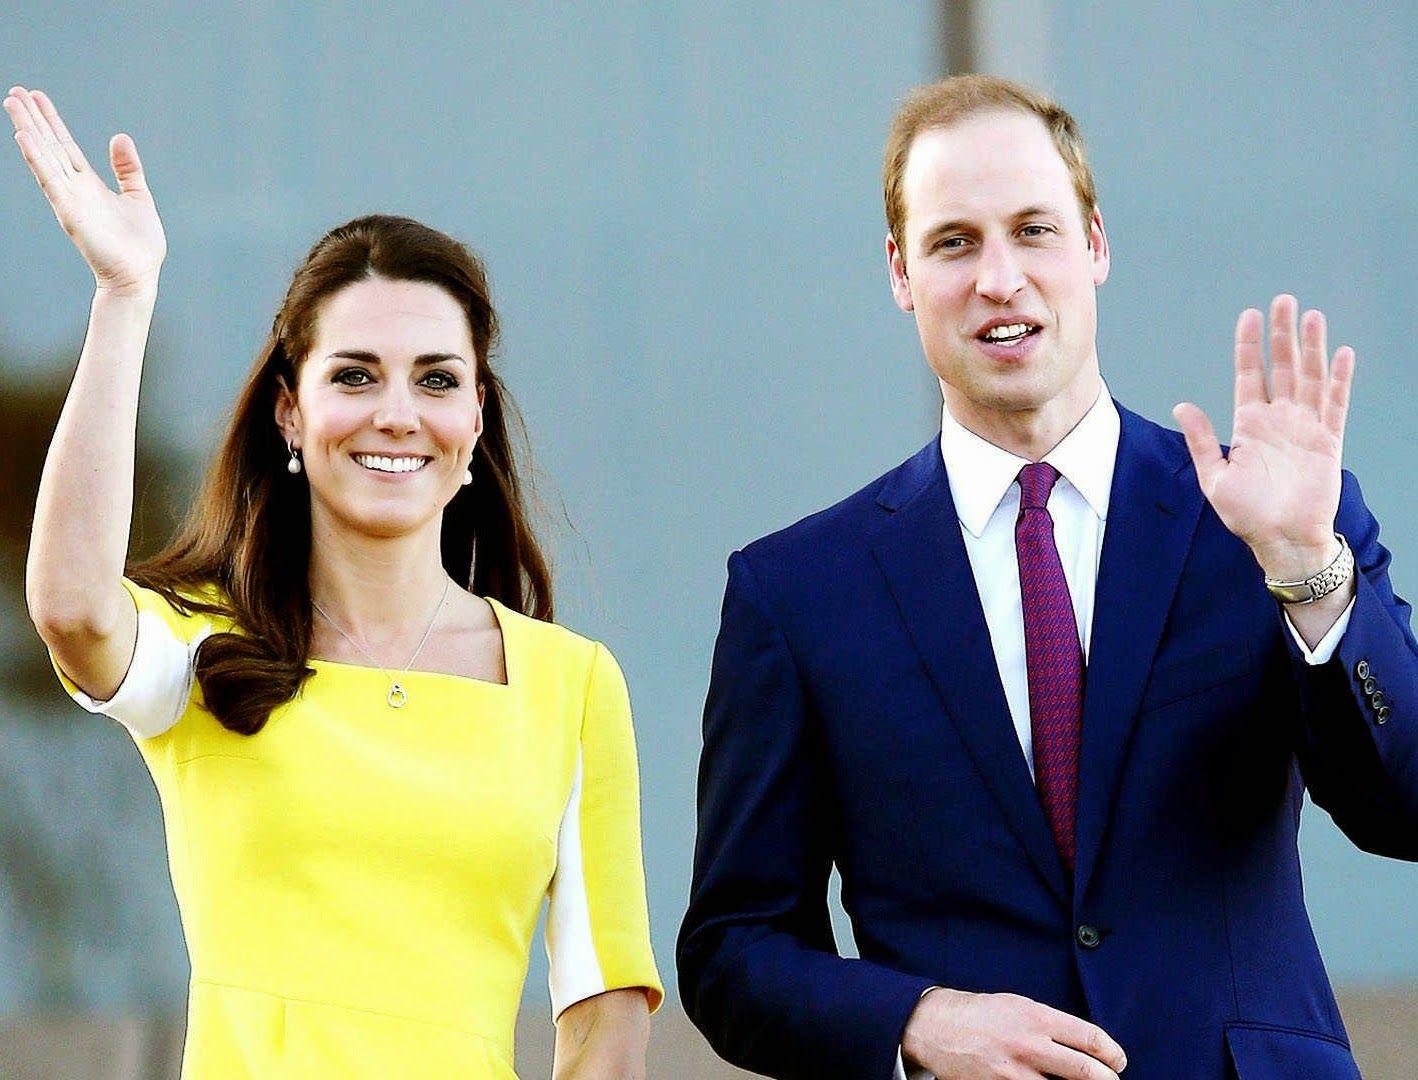 Kate Middleton & Prince William Wallpaper Download. Every Couples